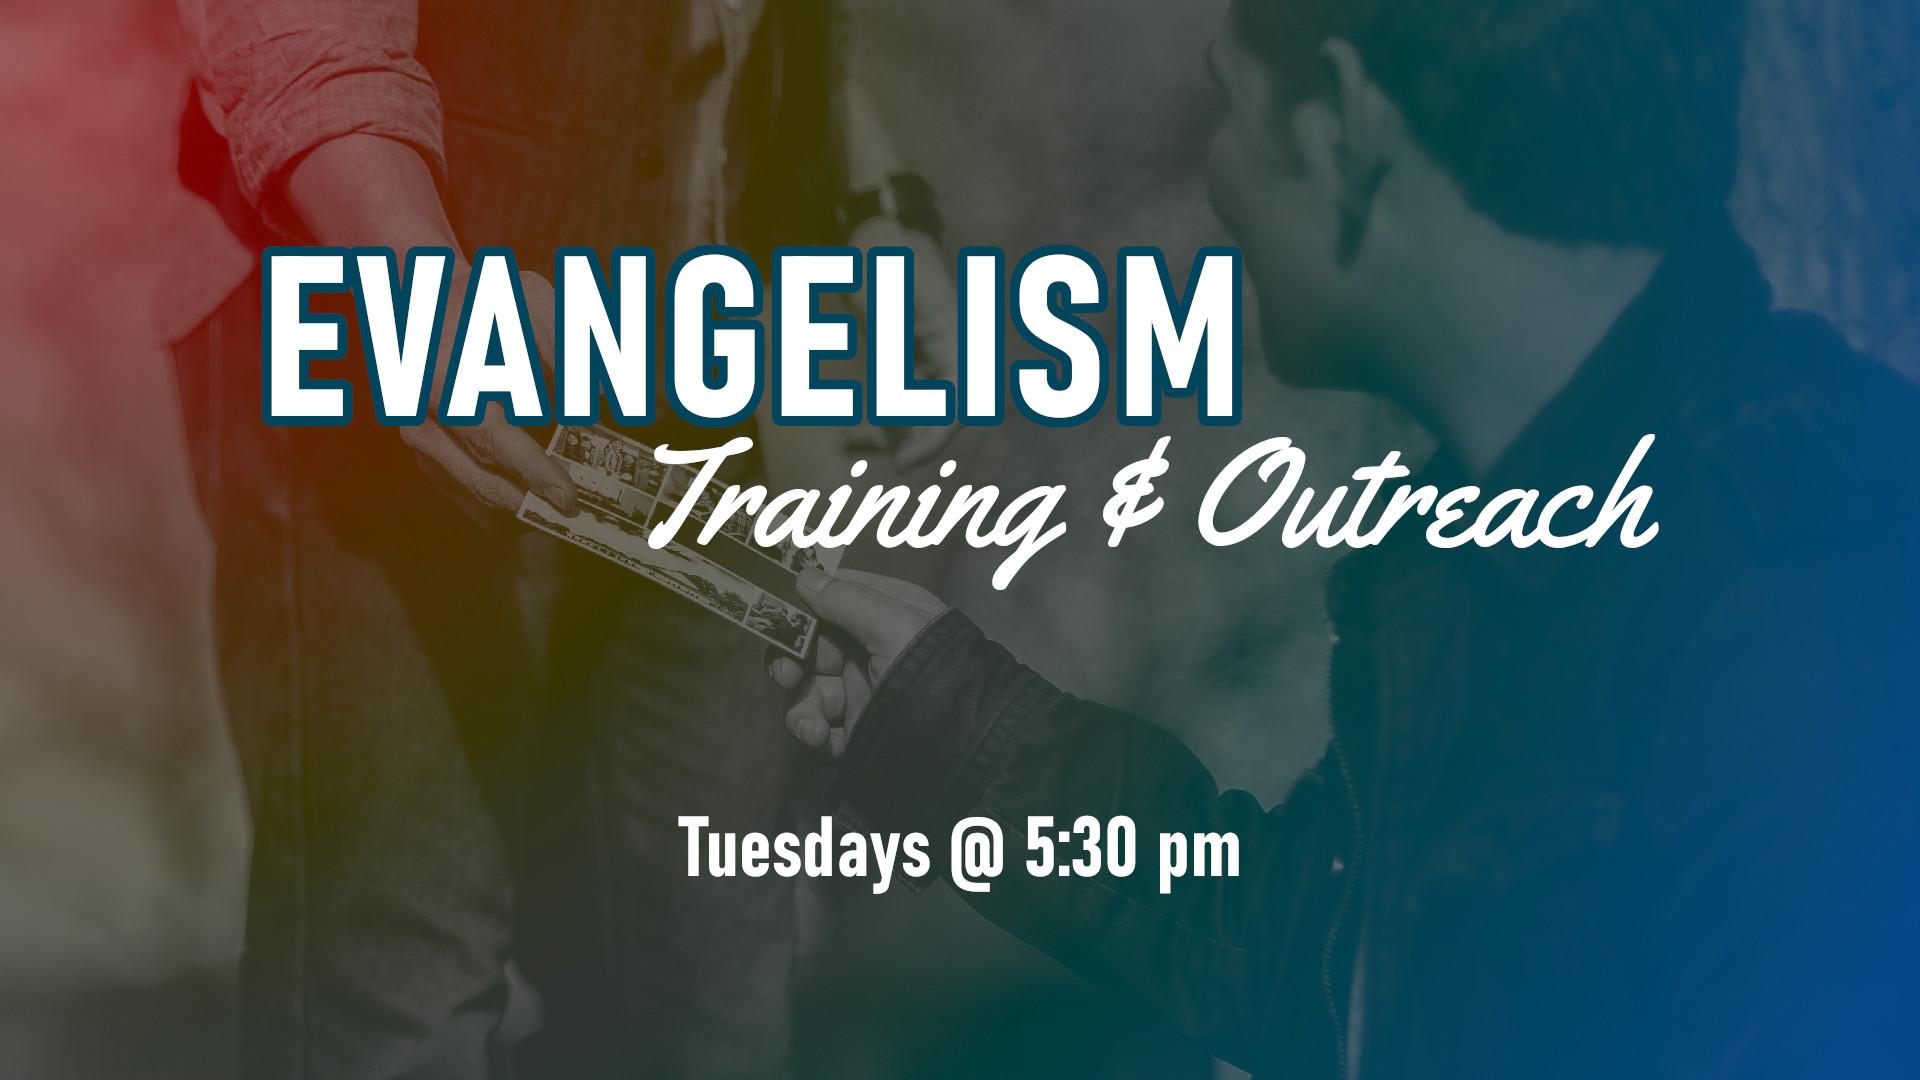 Evangelism training and outreach Tuesdays at 5:30 pm